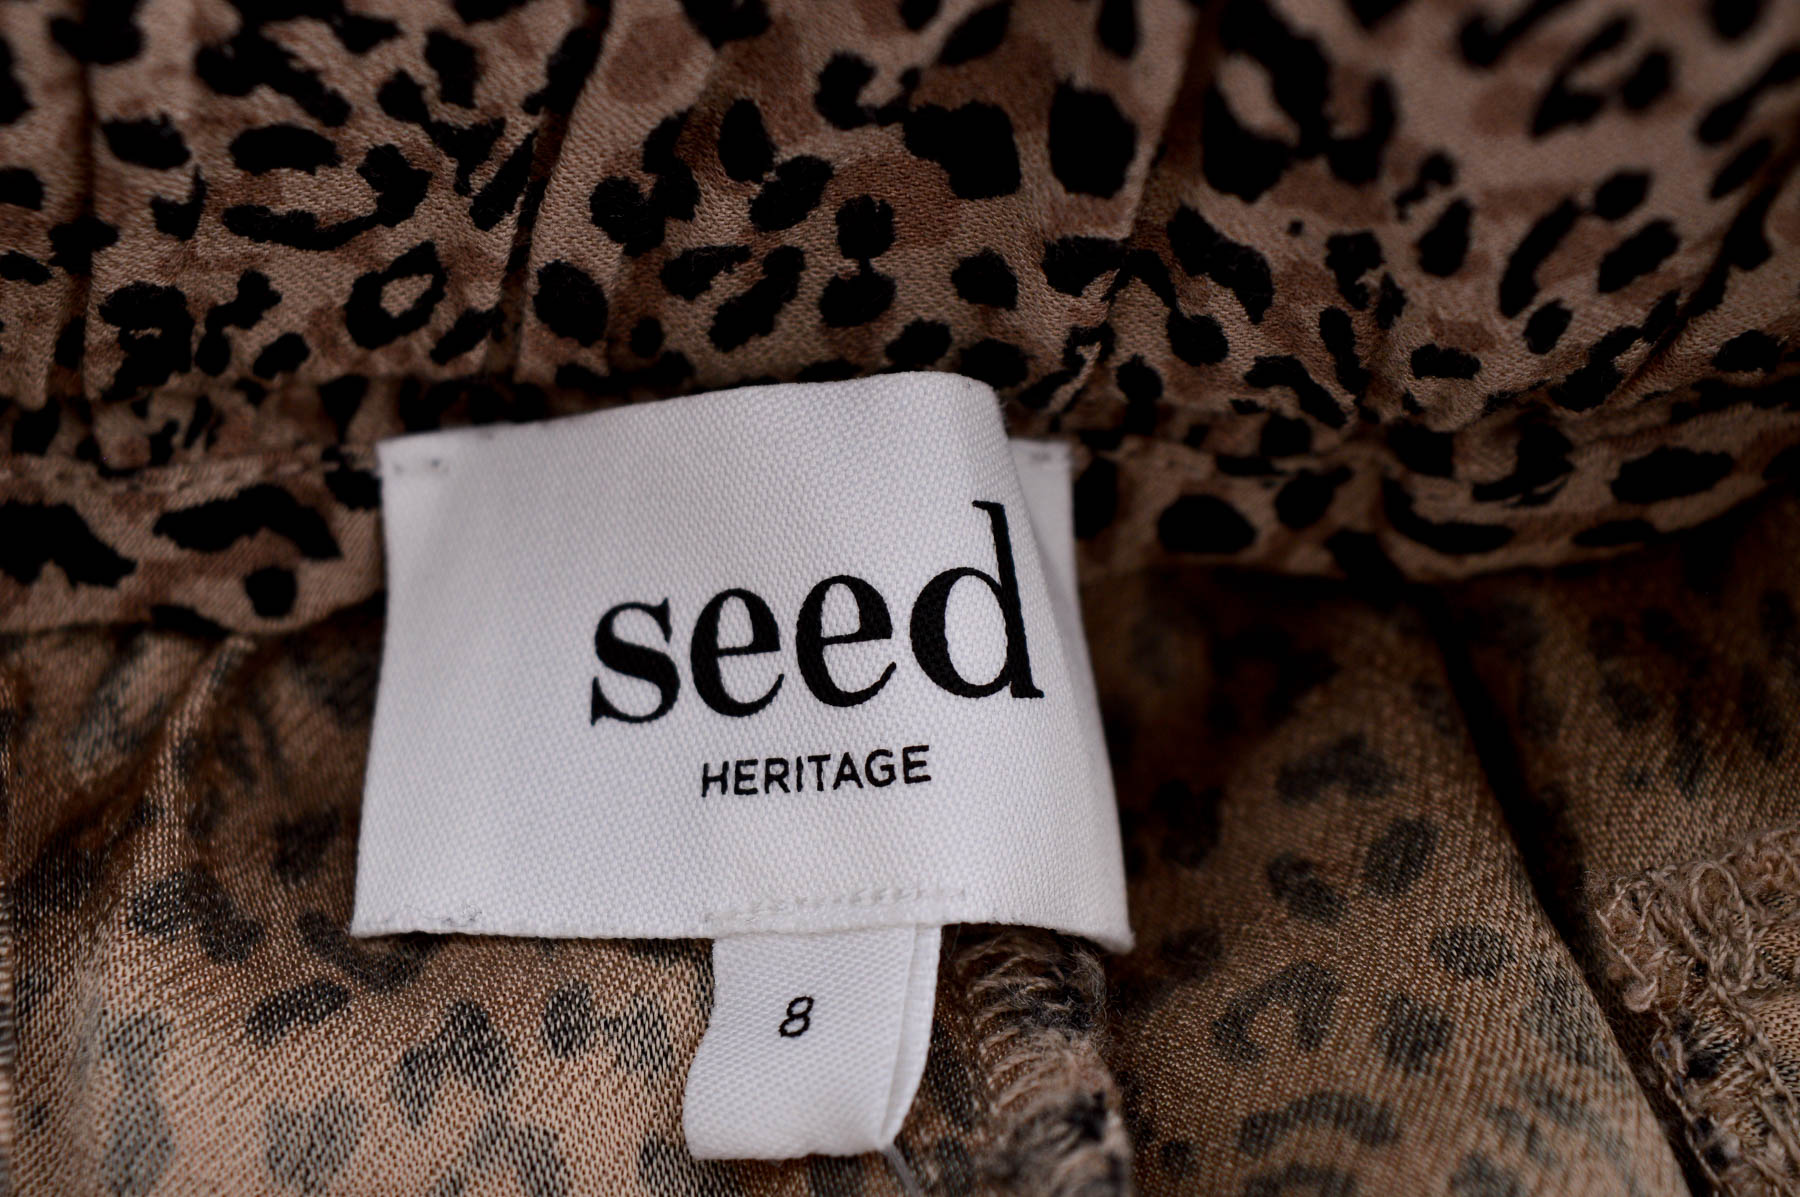 Women's trousers - SEED Heritage - 2